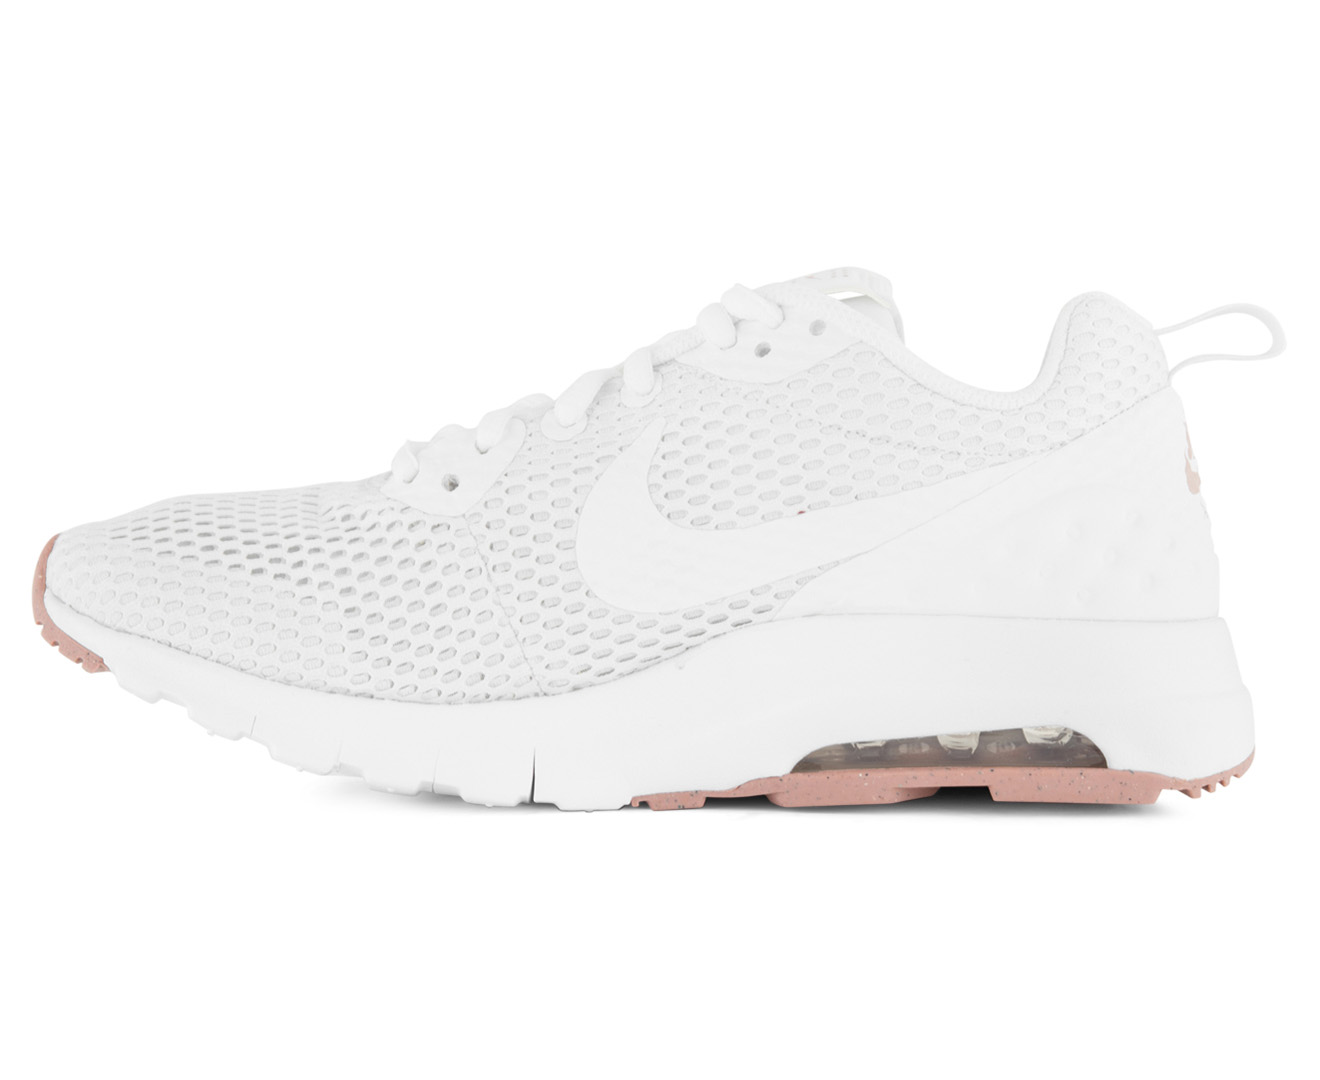 nike air max motion particle pink